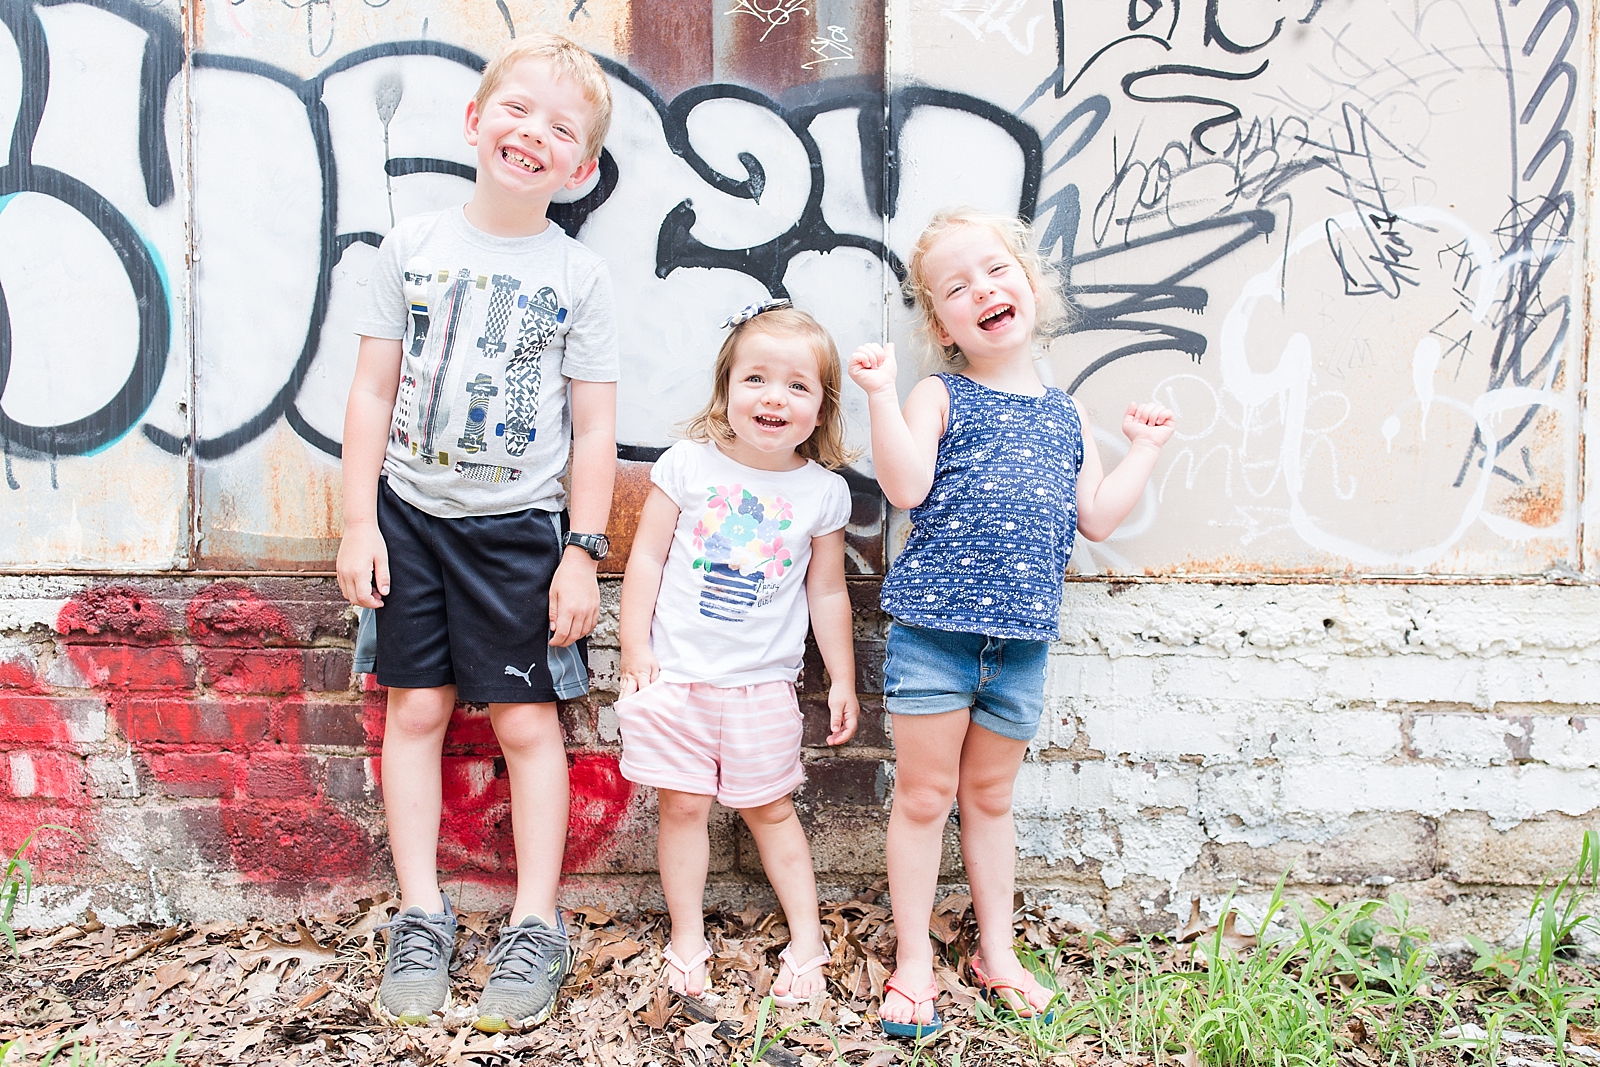 Kids smiling in front of graffiti wall in Asheville NC photo